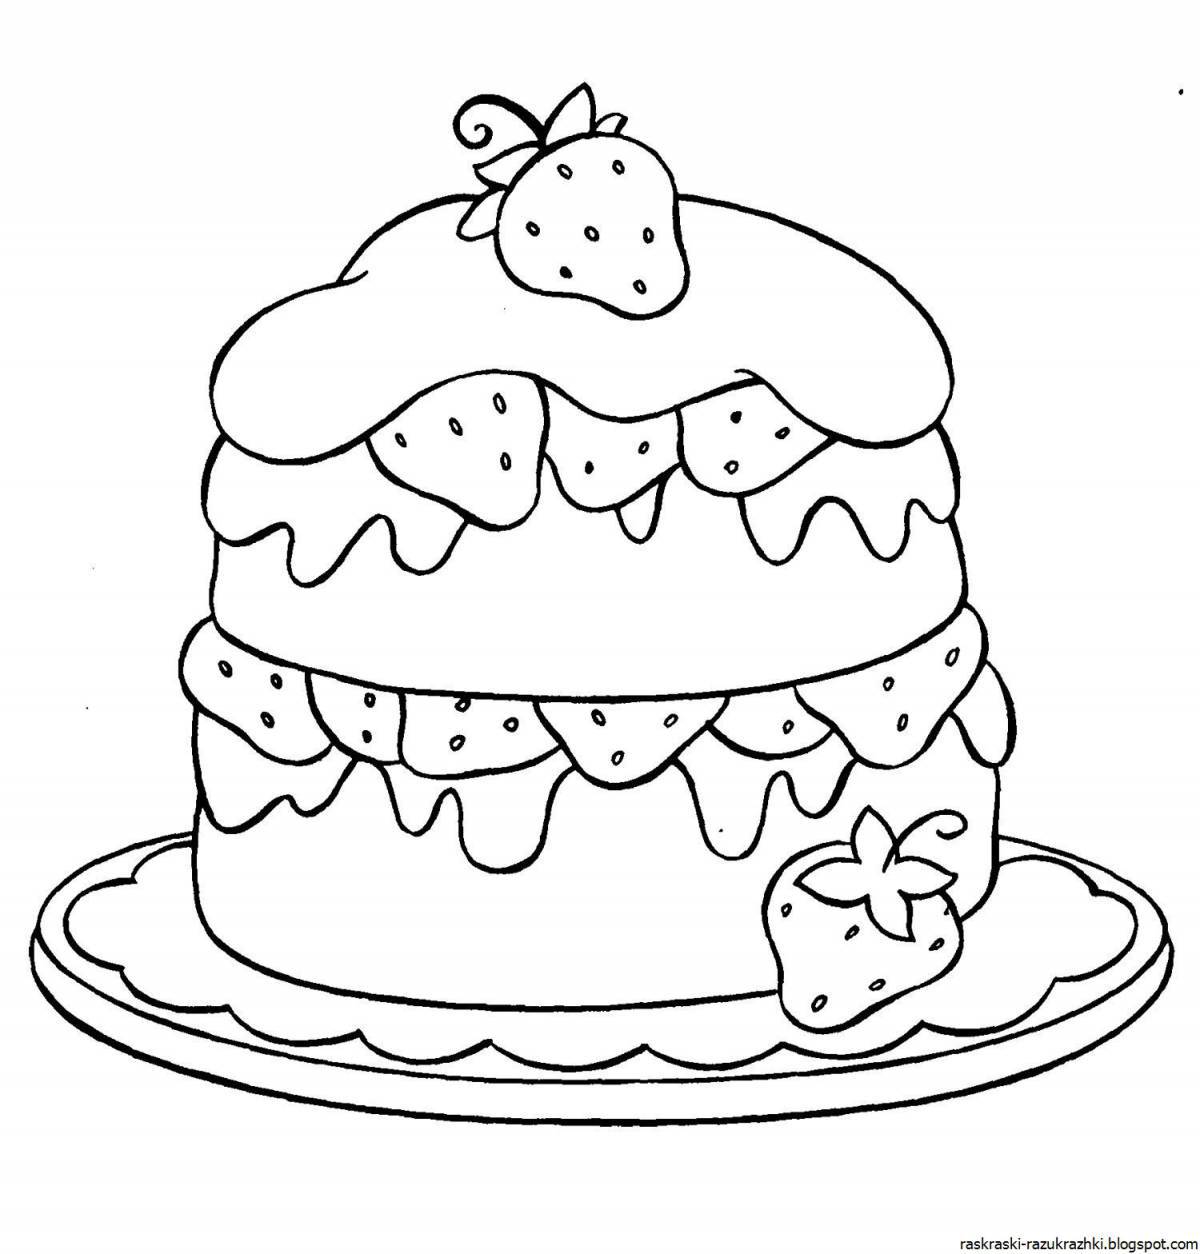 Vibrant cake coloring page for kids